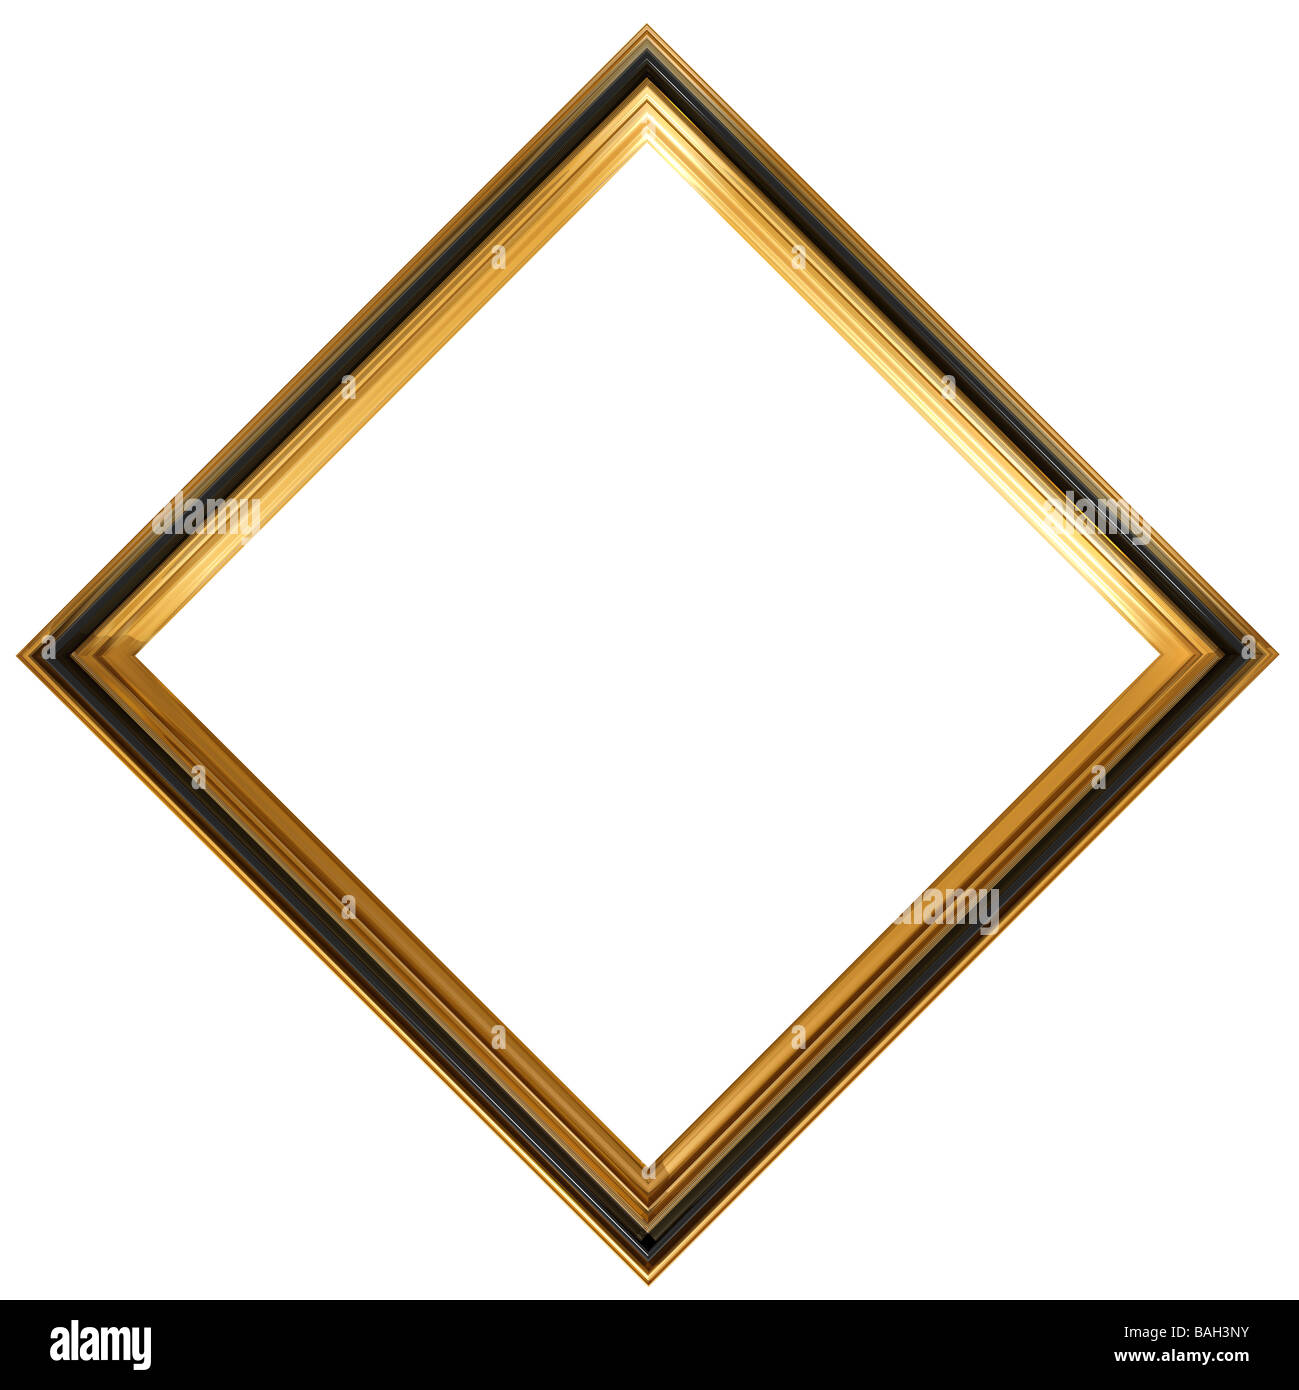 Isolated illustration of a diamond shaped Georgian picture frame Stock Photo